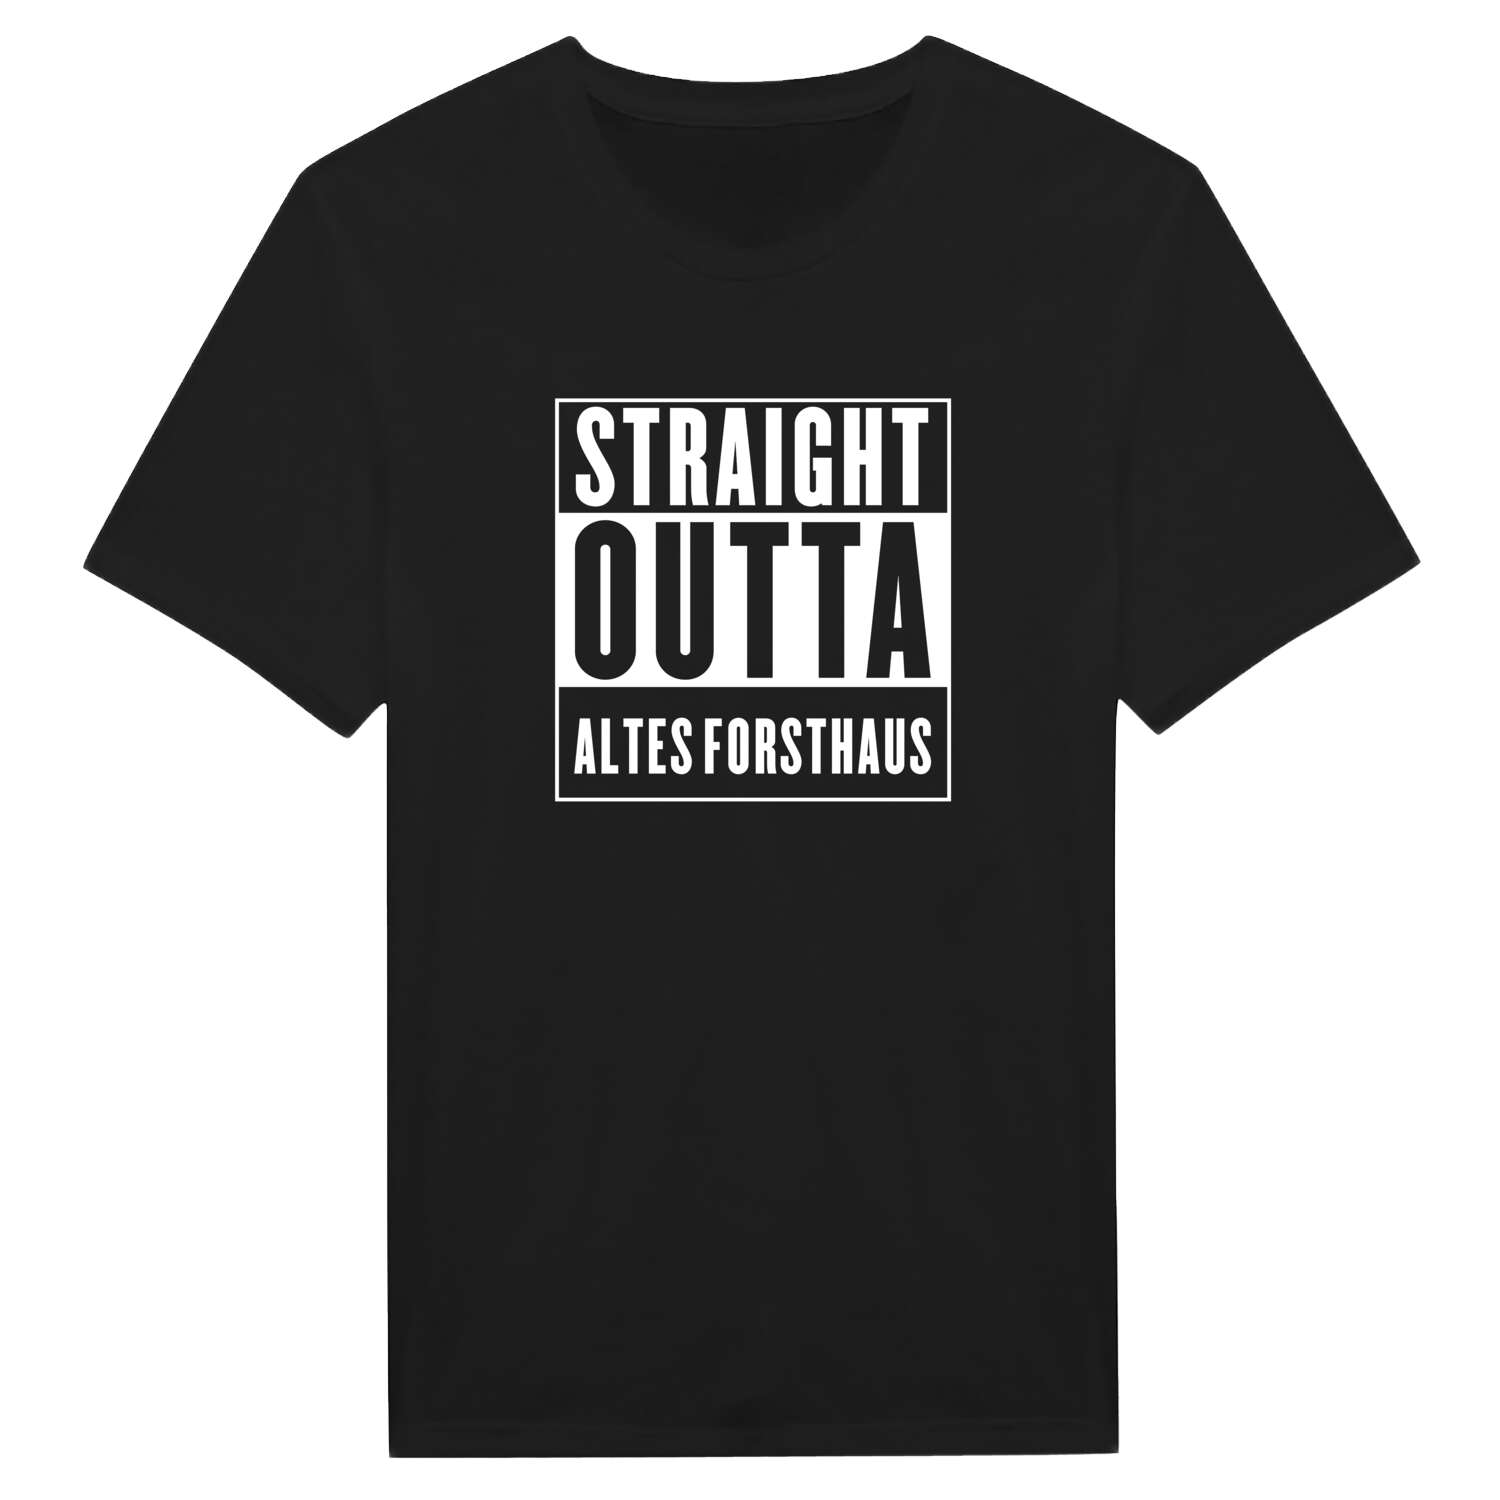 Altes Forsthaus T-Shirt »Straight Outta«